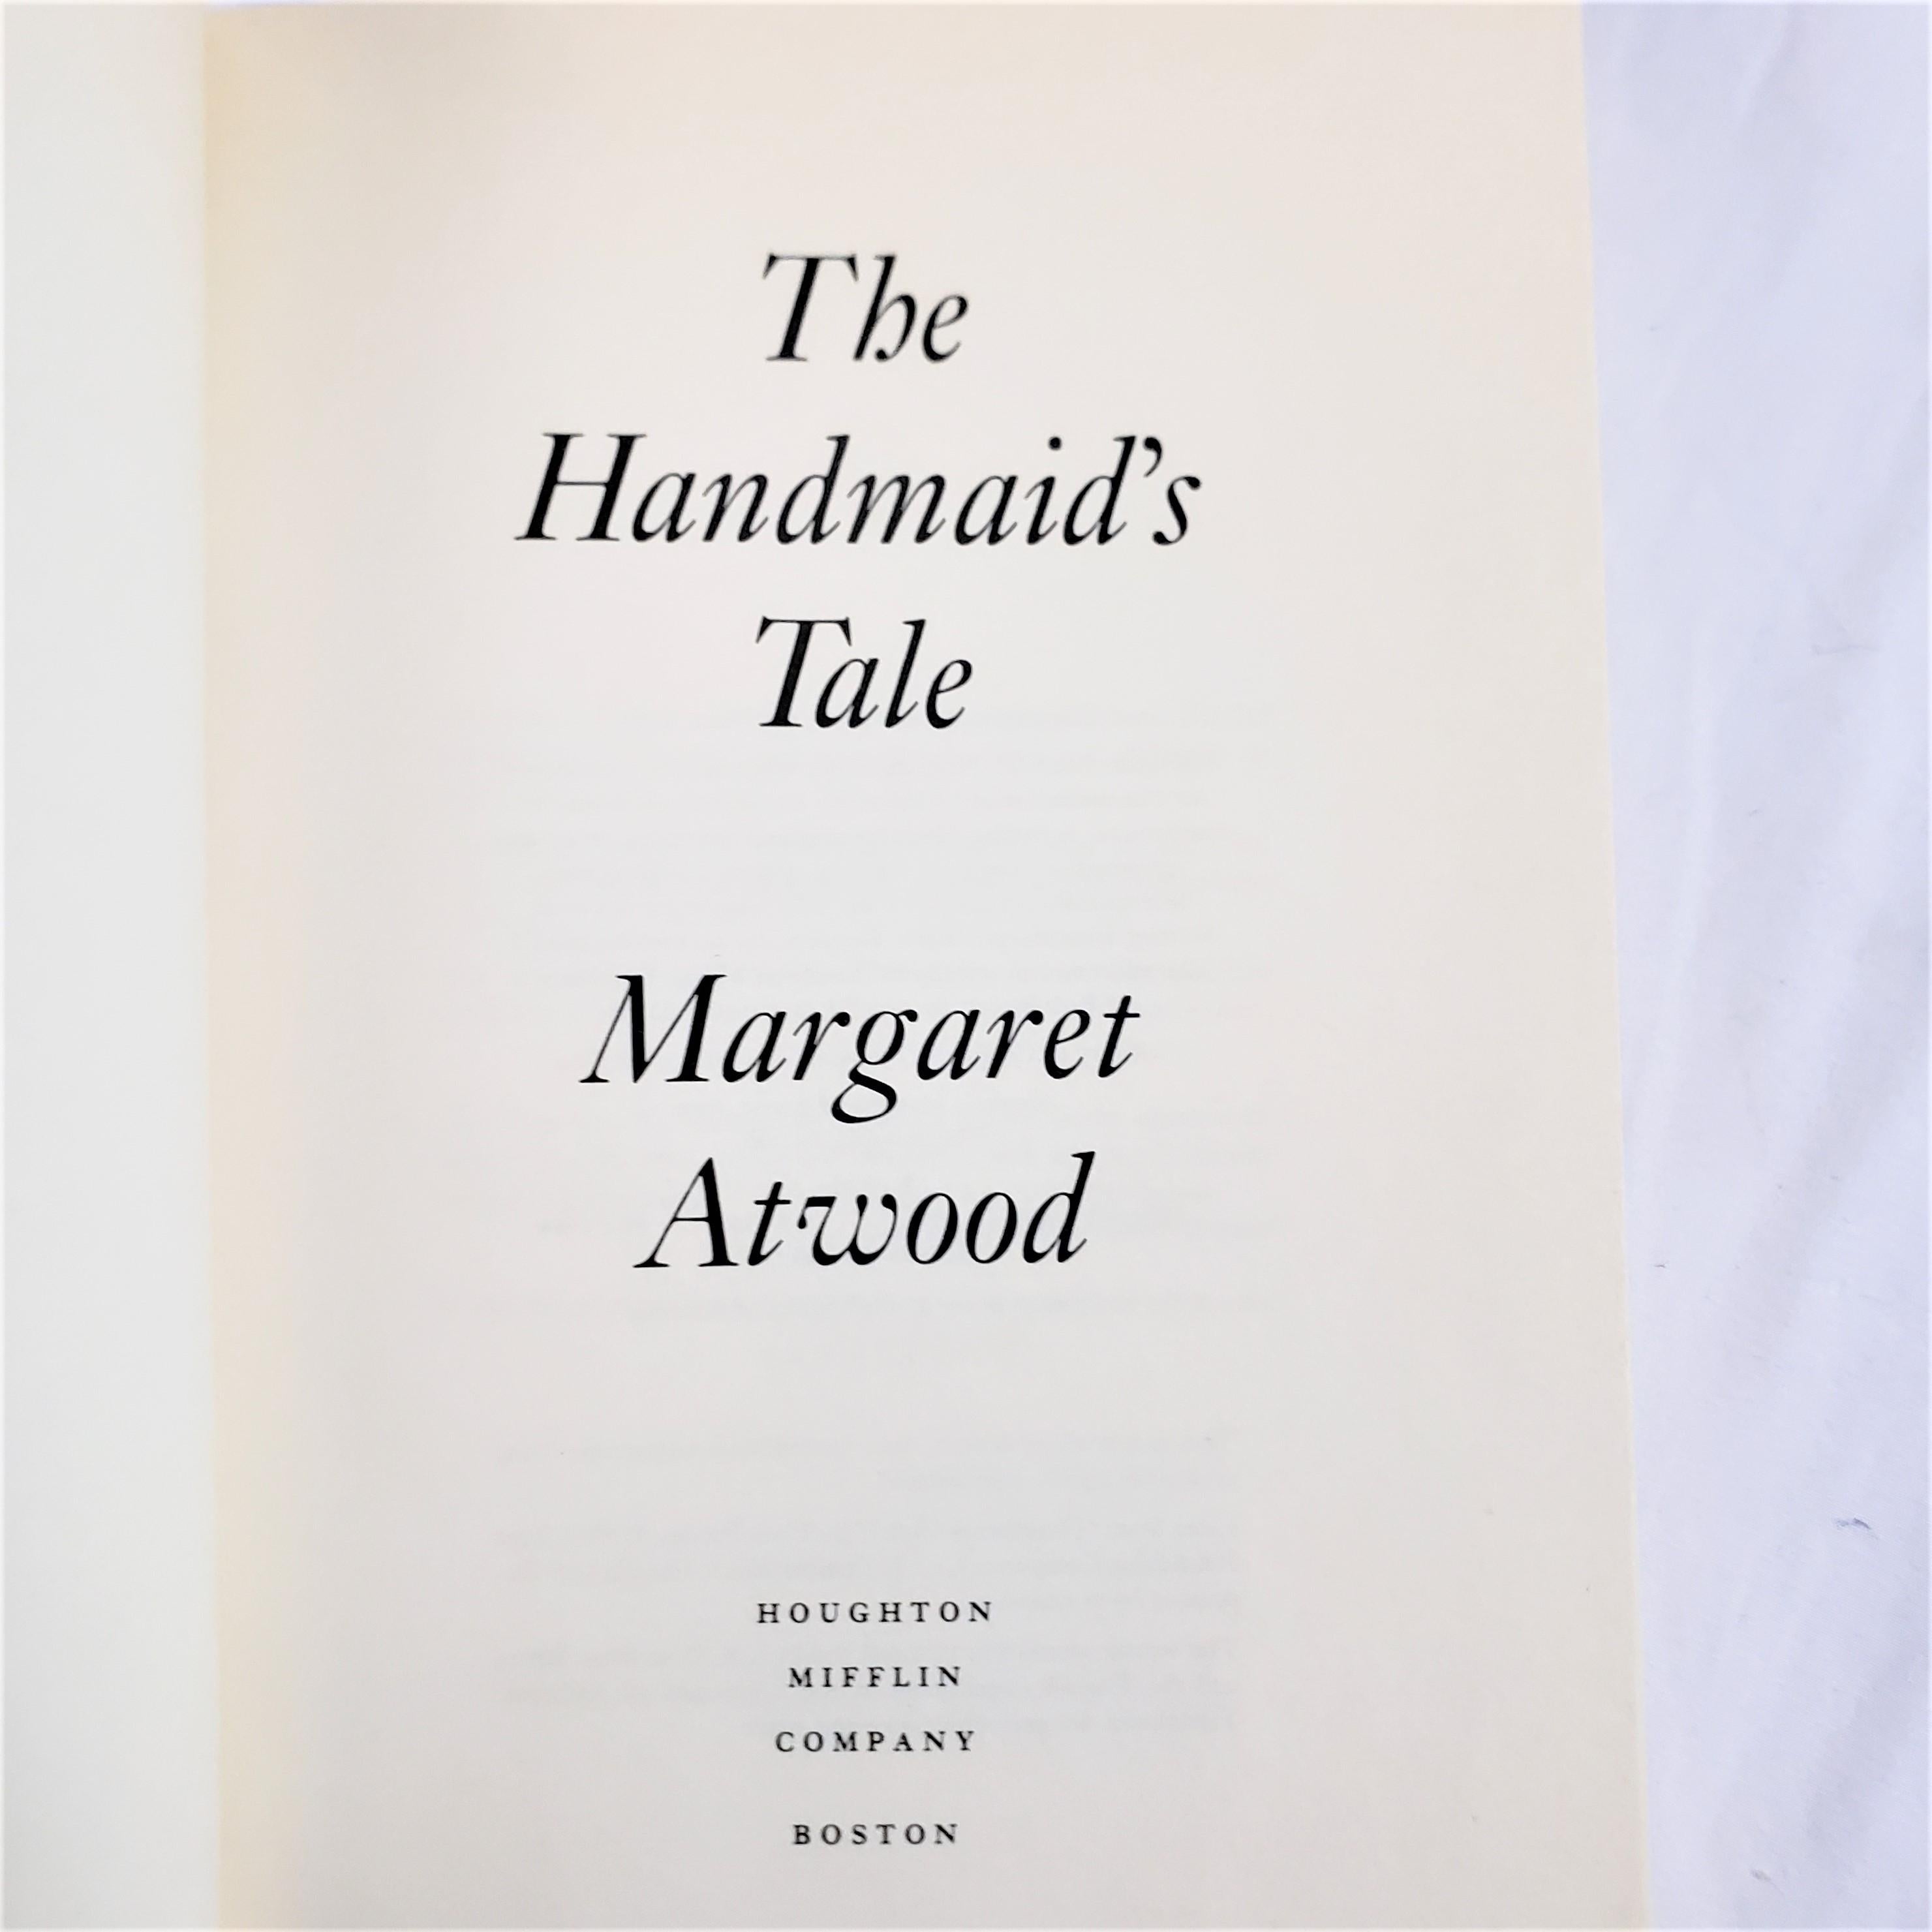 Modern Margaret Atwood Autographed 'The Handmaid's Tale' 1986 O.W. Toad Ltd. U.S.A. For Sale